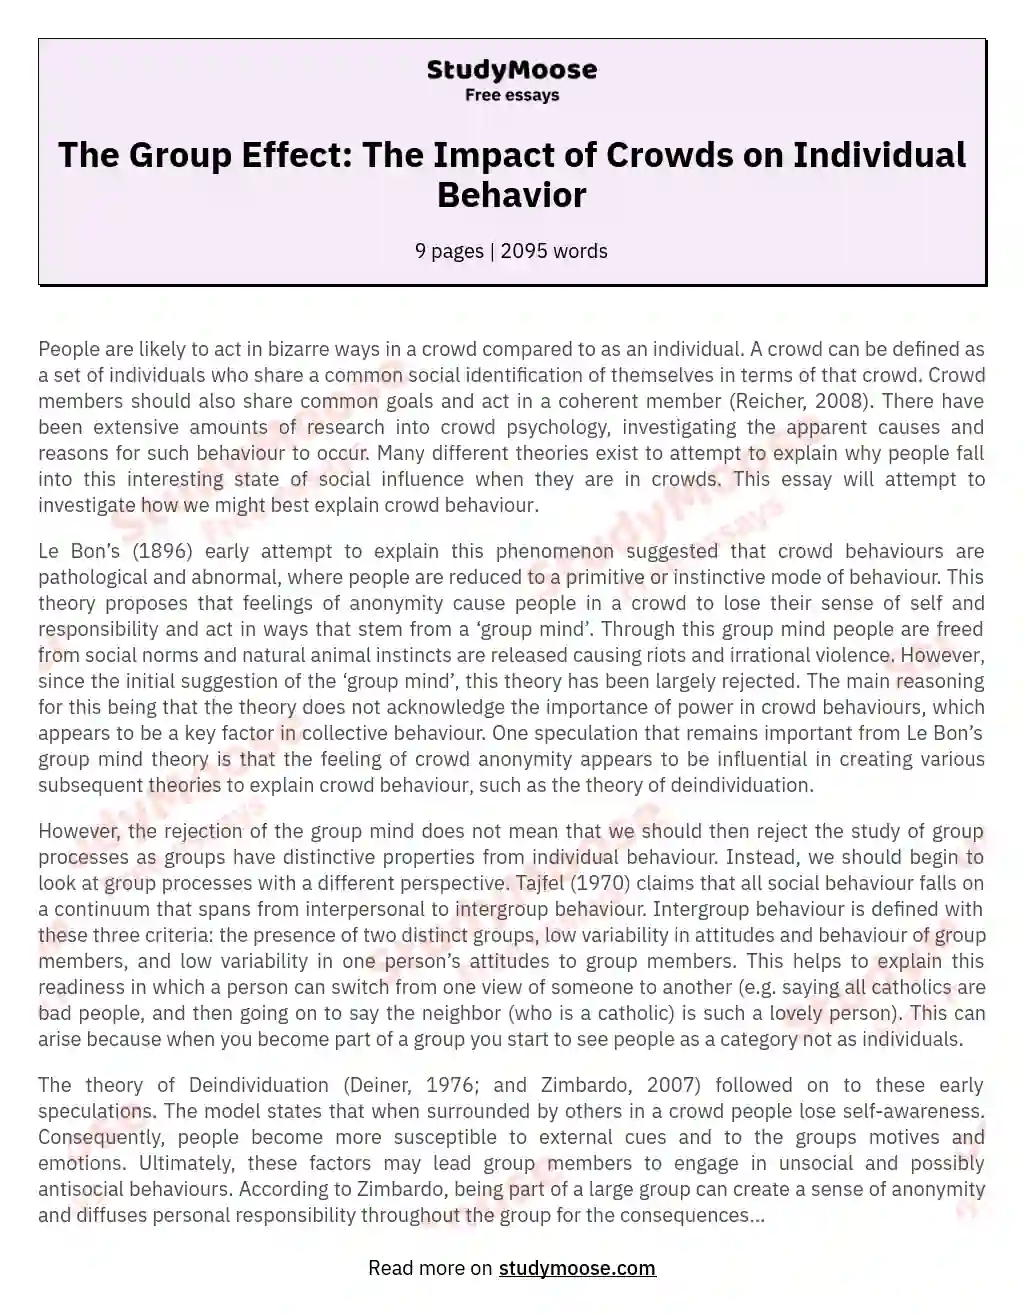 The Group Effect: The Impact of Crowds on Individual Behavior essay